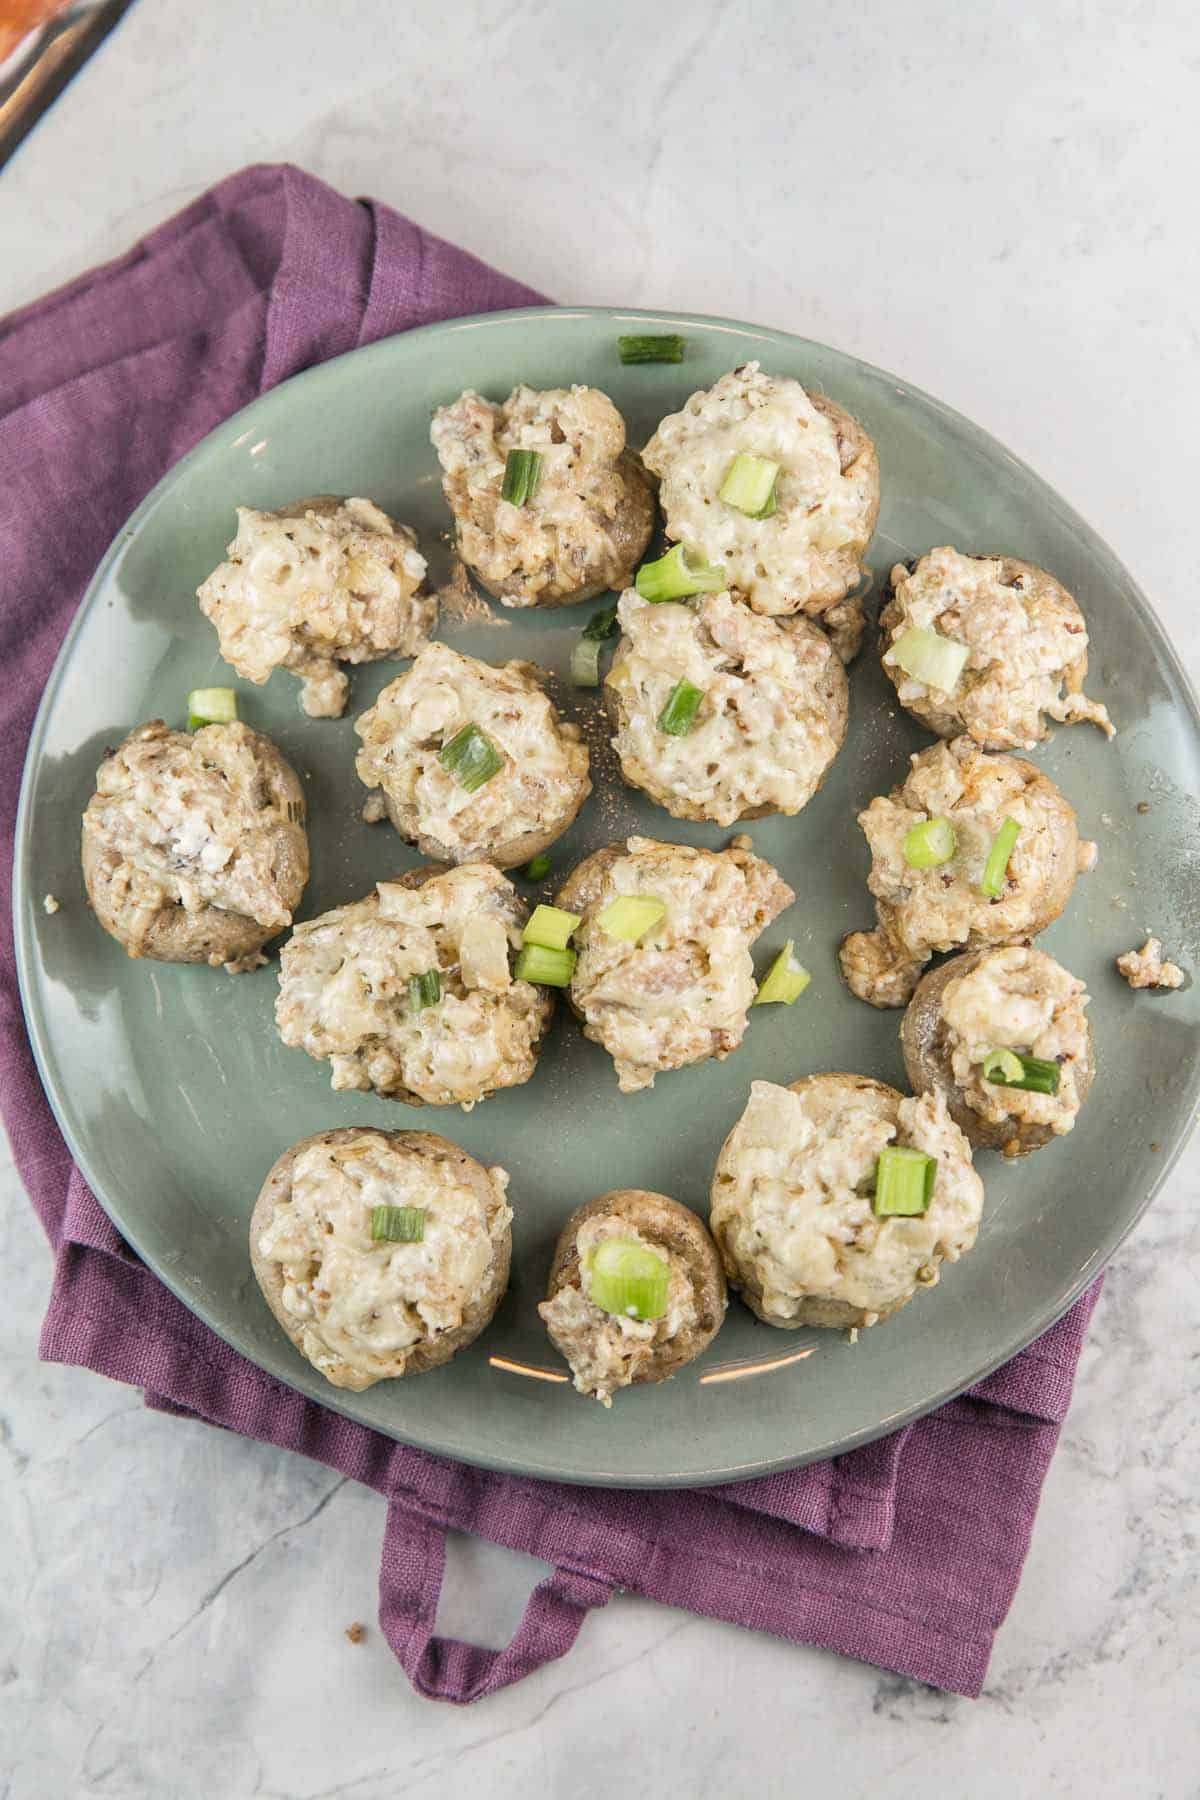 Instant Pot Stuffed Mushrooms: a classic sausage stuffed mushroom recipe, updated for your pressure cooker. Leave the oven free for dessert and make stuffed mushrooms right in the Instant Pot with fewer dishes, less time, and more flavor. #bunsenburmerbakery #partyfood #superbowlparty #appetizers #ad